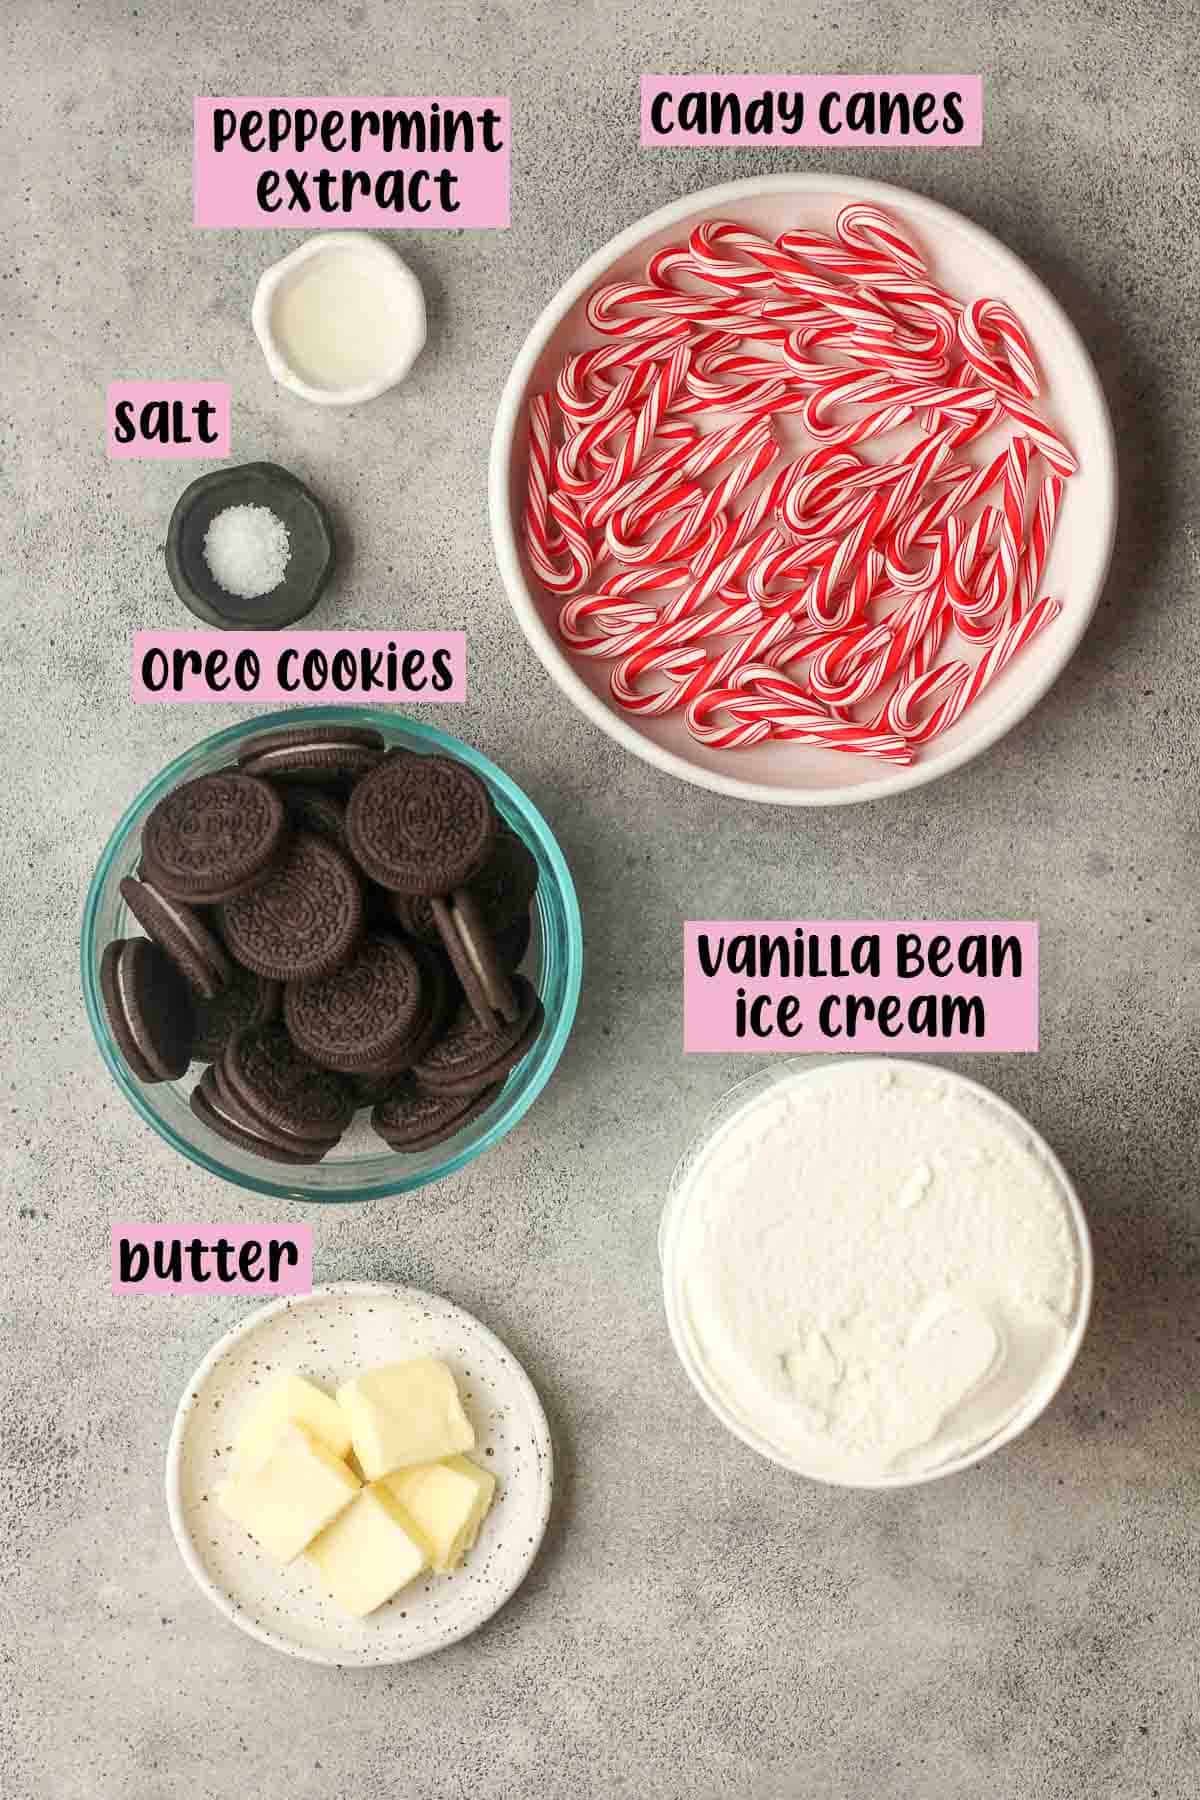 The ingredients for the candy cane pie.